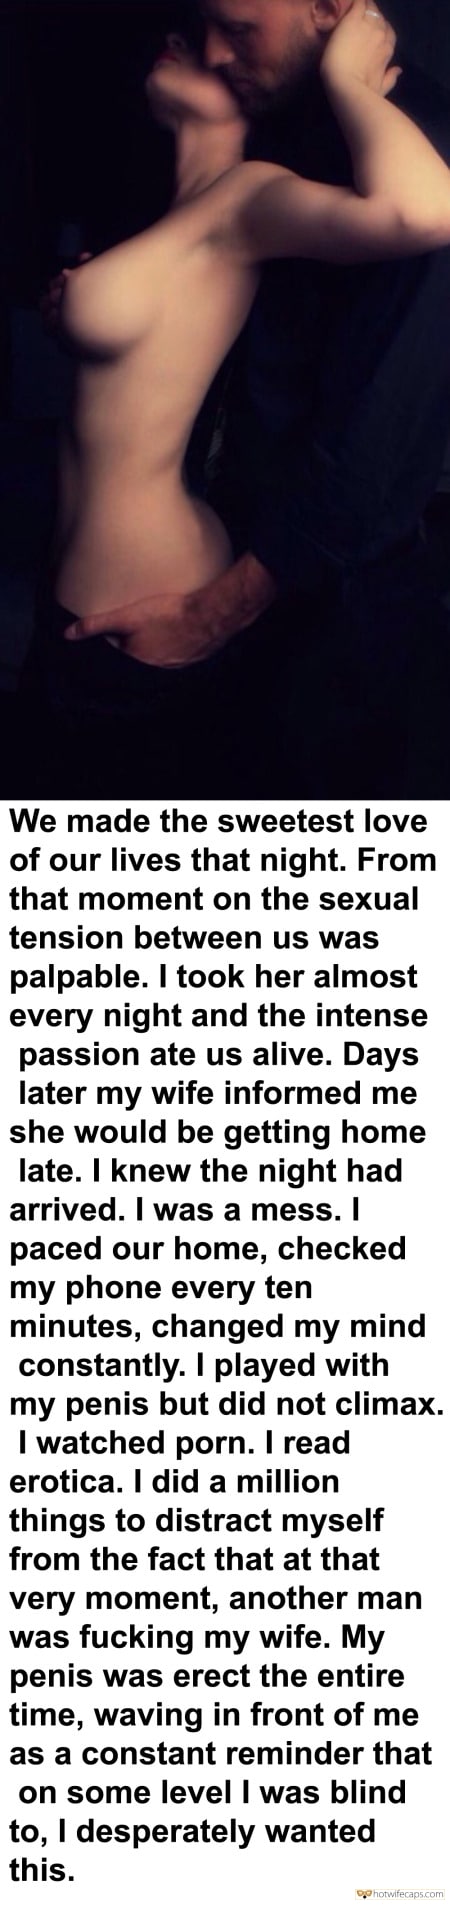 My Favorite hotwife caption: We made the sweetest love of our lives that night. From that moment on the sexual tension between us was palpable. I took her almost every night and the intense passion ate us alive. Days later my wife informed me...